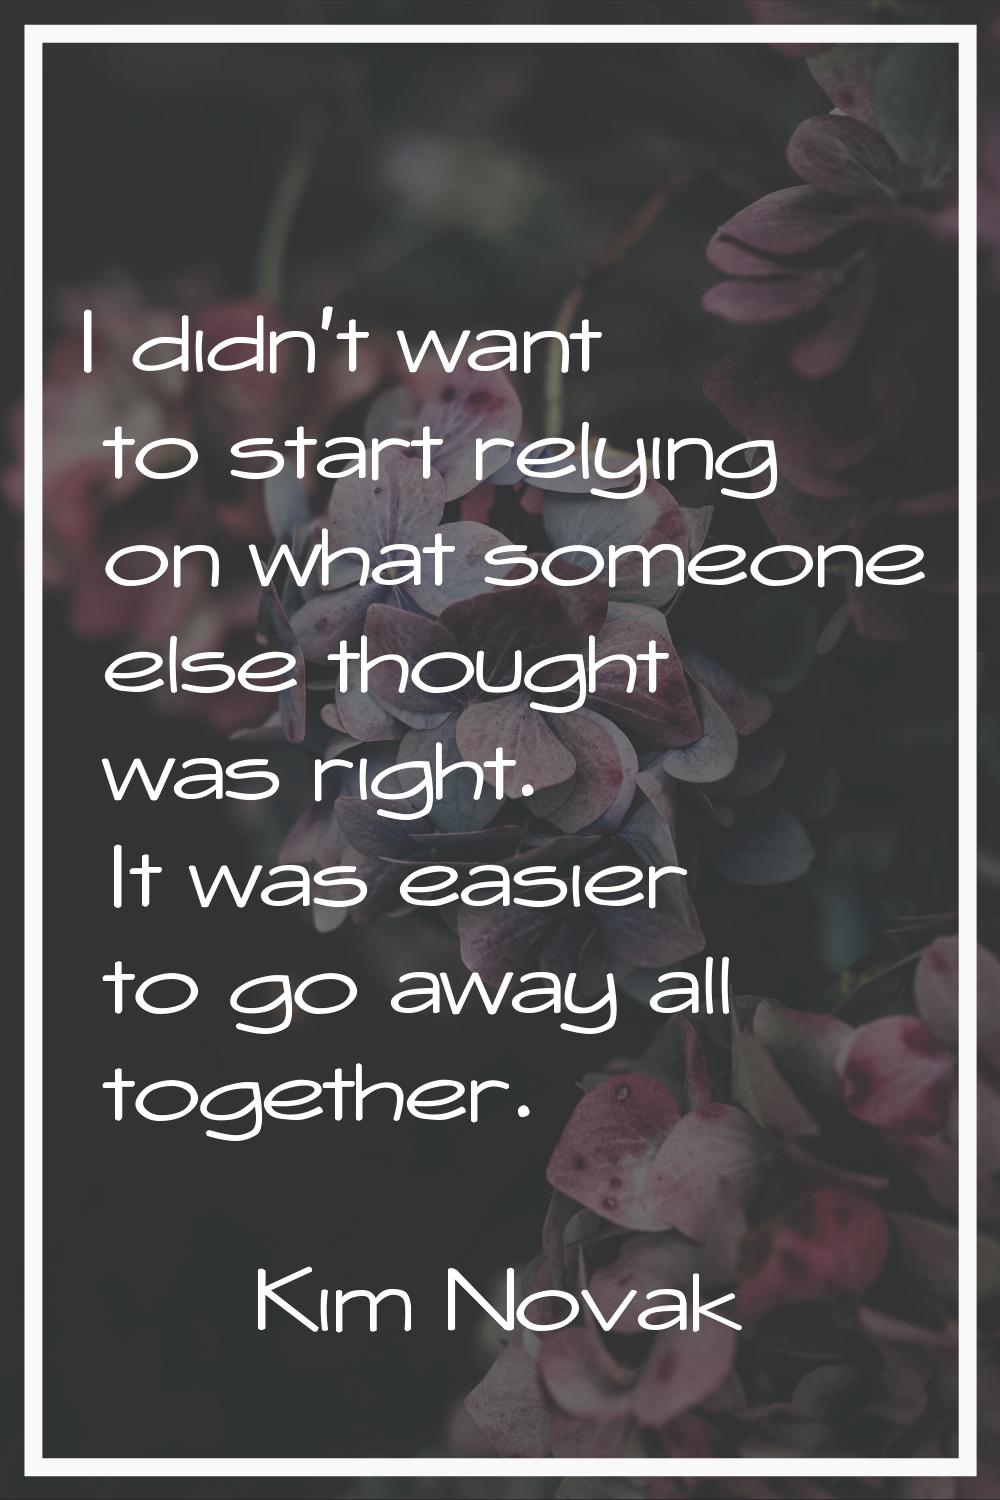 I didn't want to start relying on what someone else thought was right. It was easier to go away all